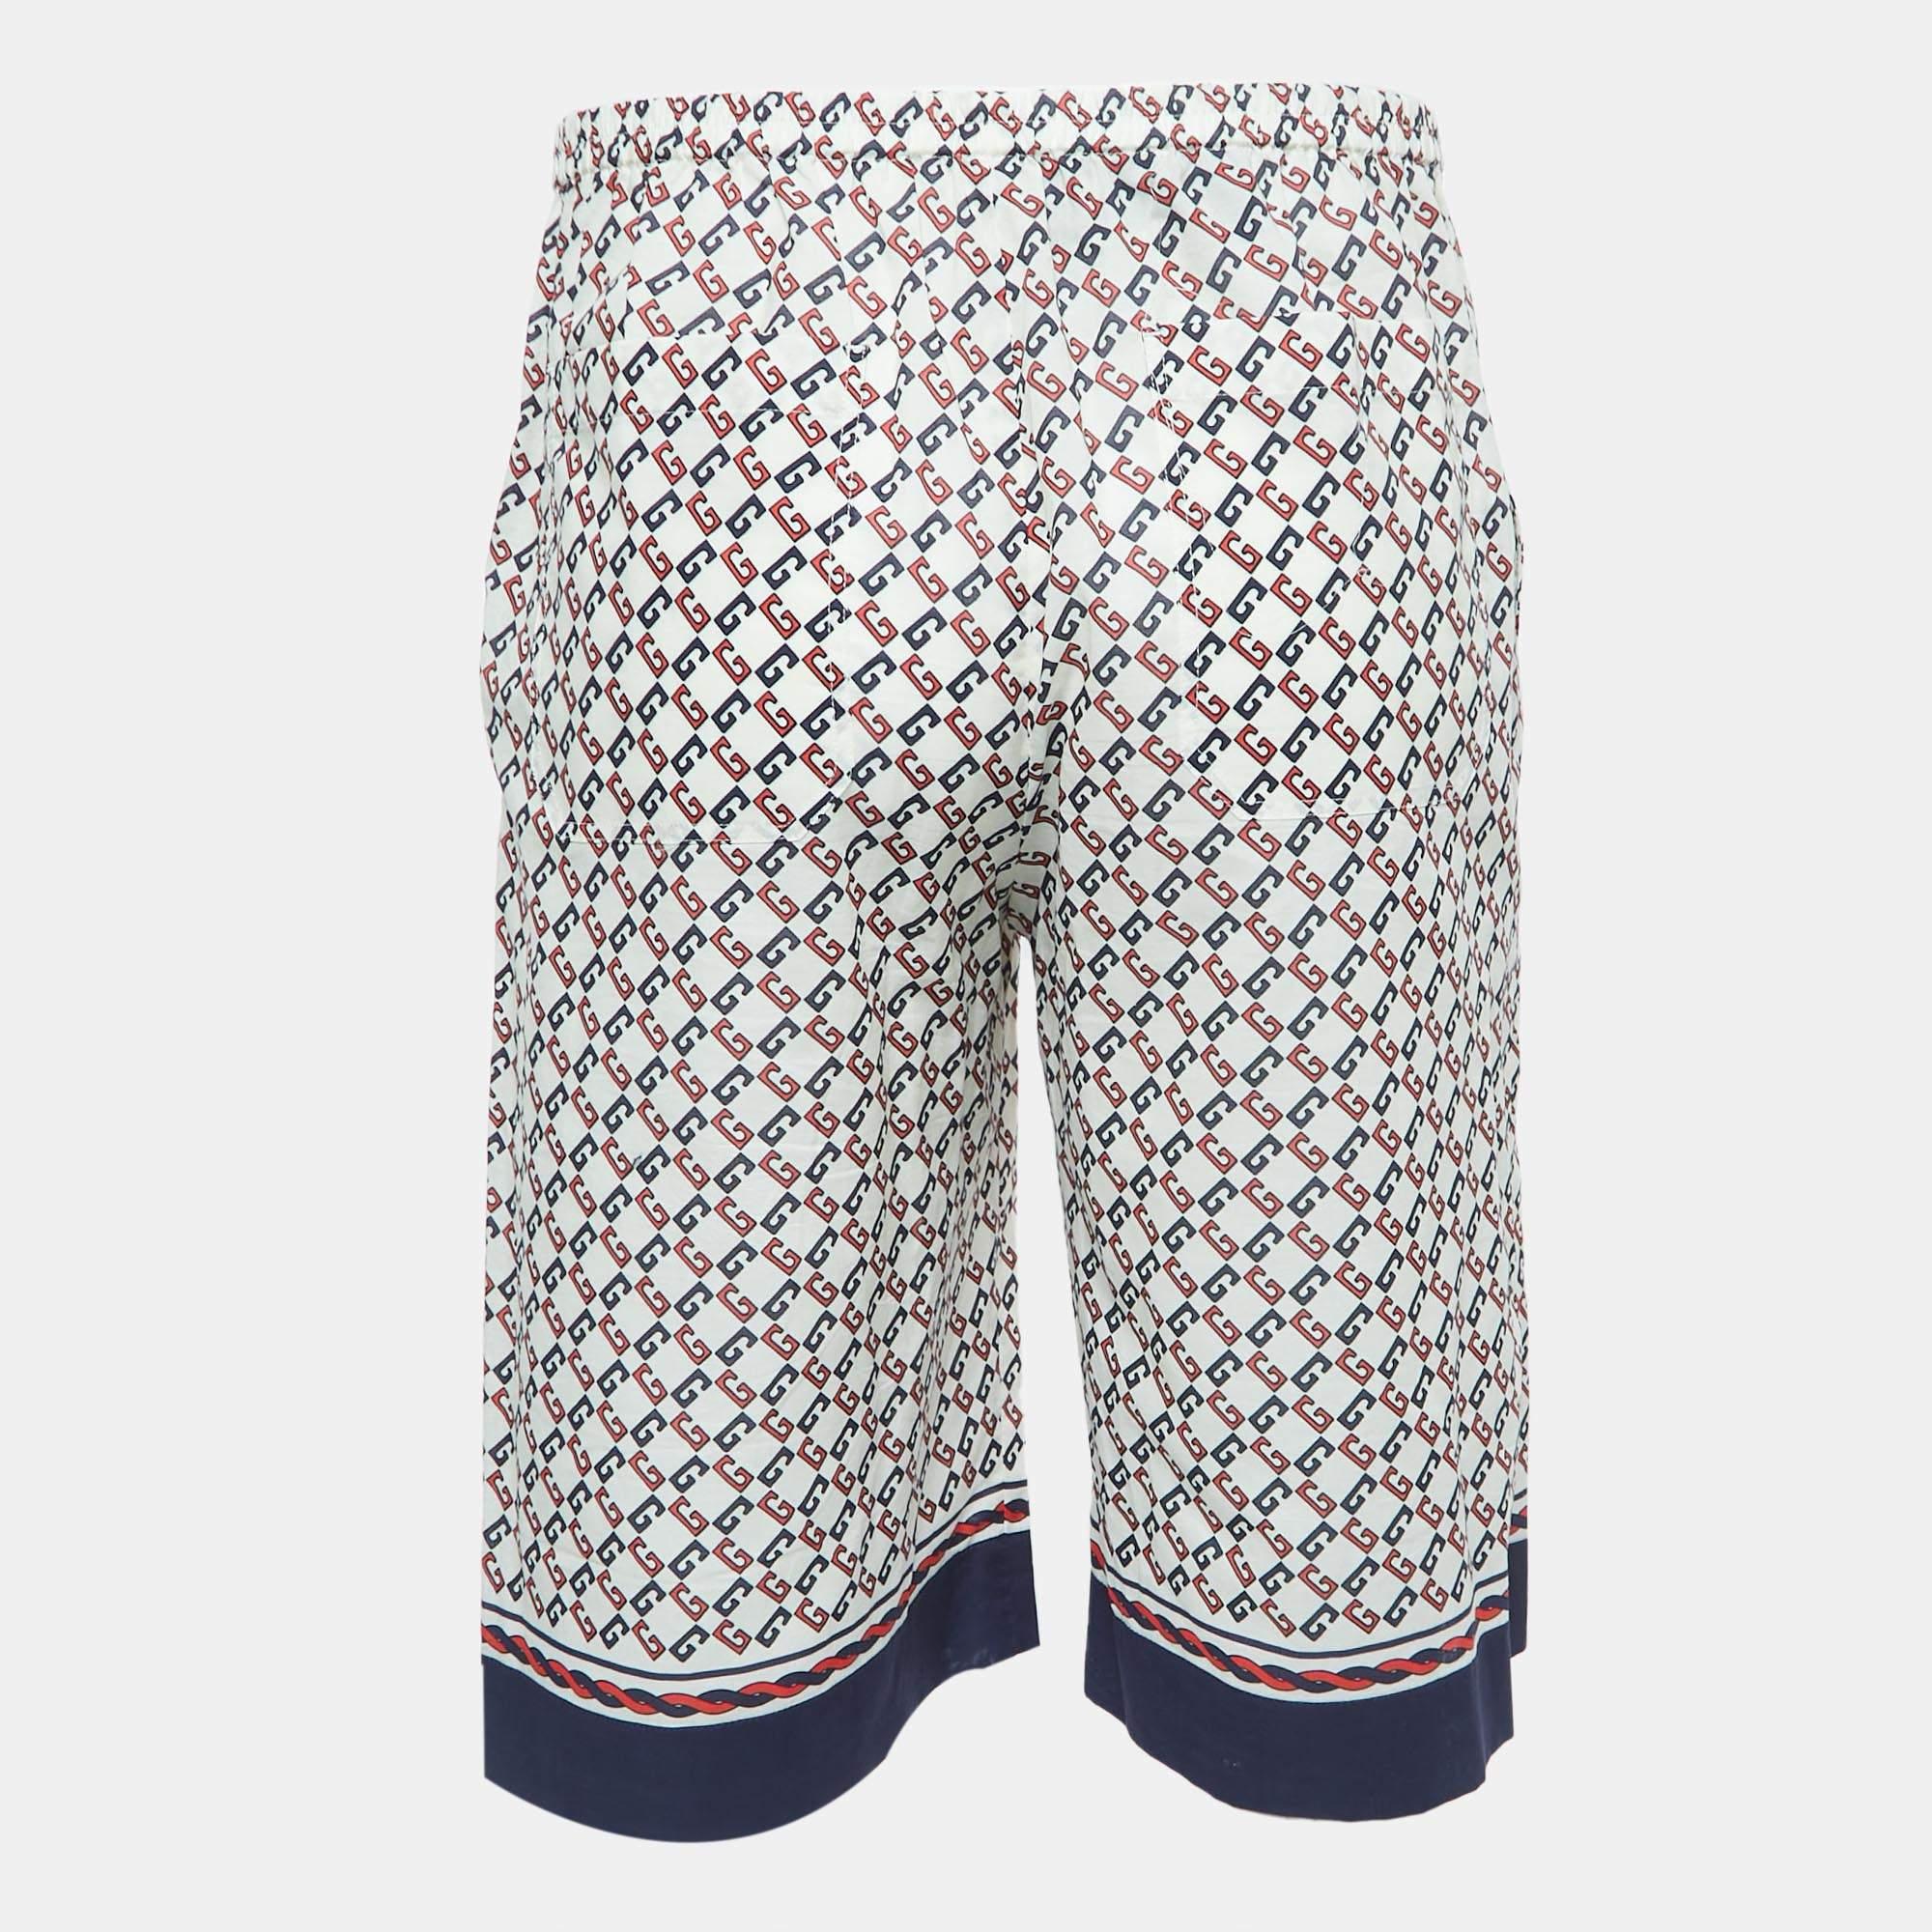 Beachy vacations call for a stylish pair of shorts like this. Stitched using high-quality fabric, this pair of shorts is styled with classic details and has a superb length. Wear it with T-shirts.

